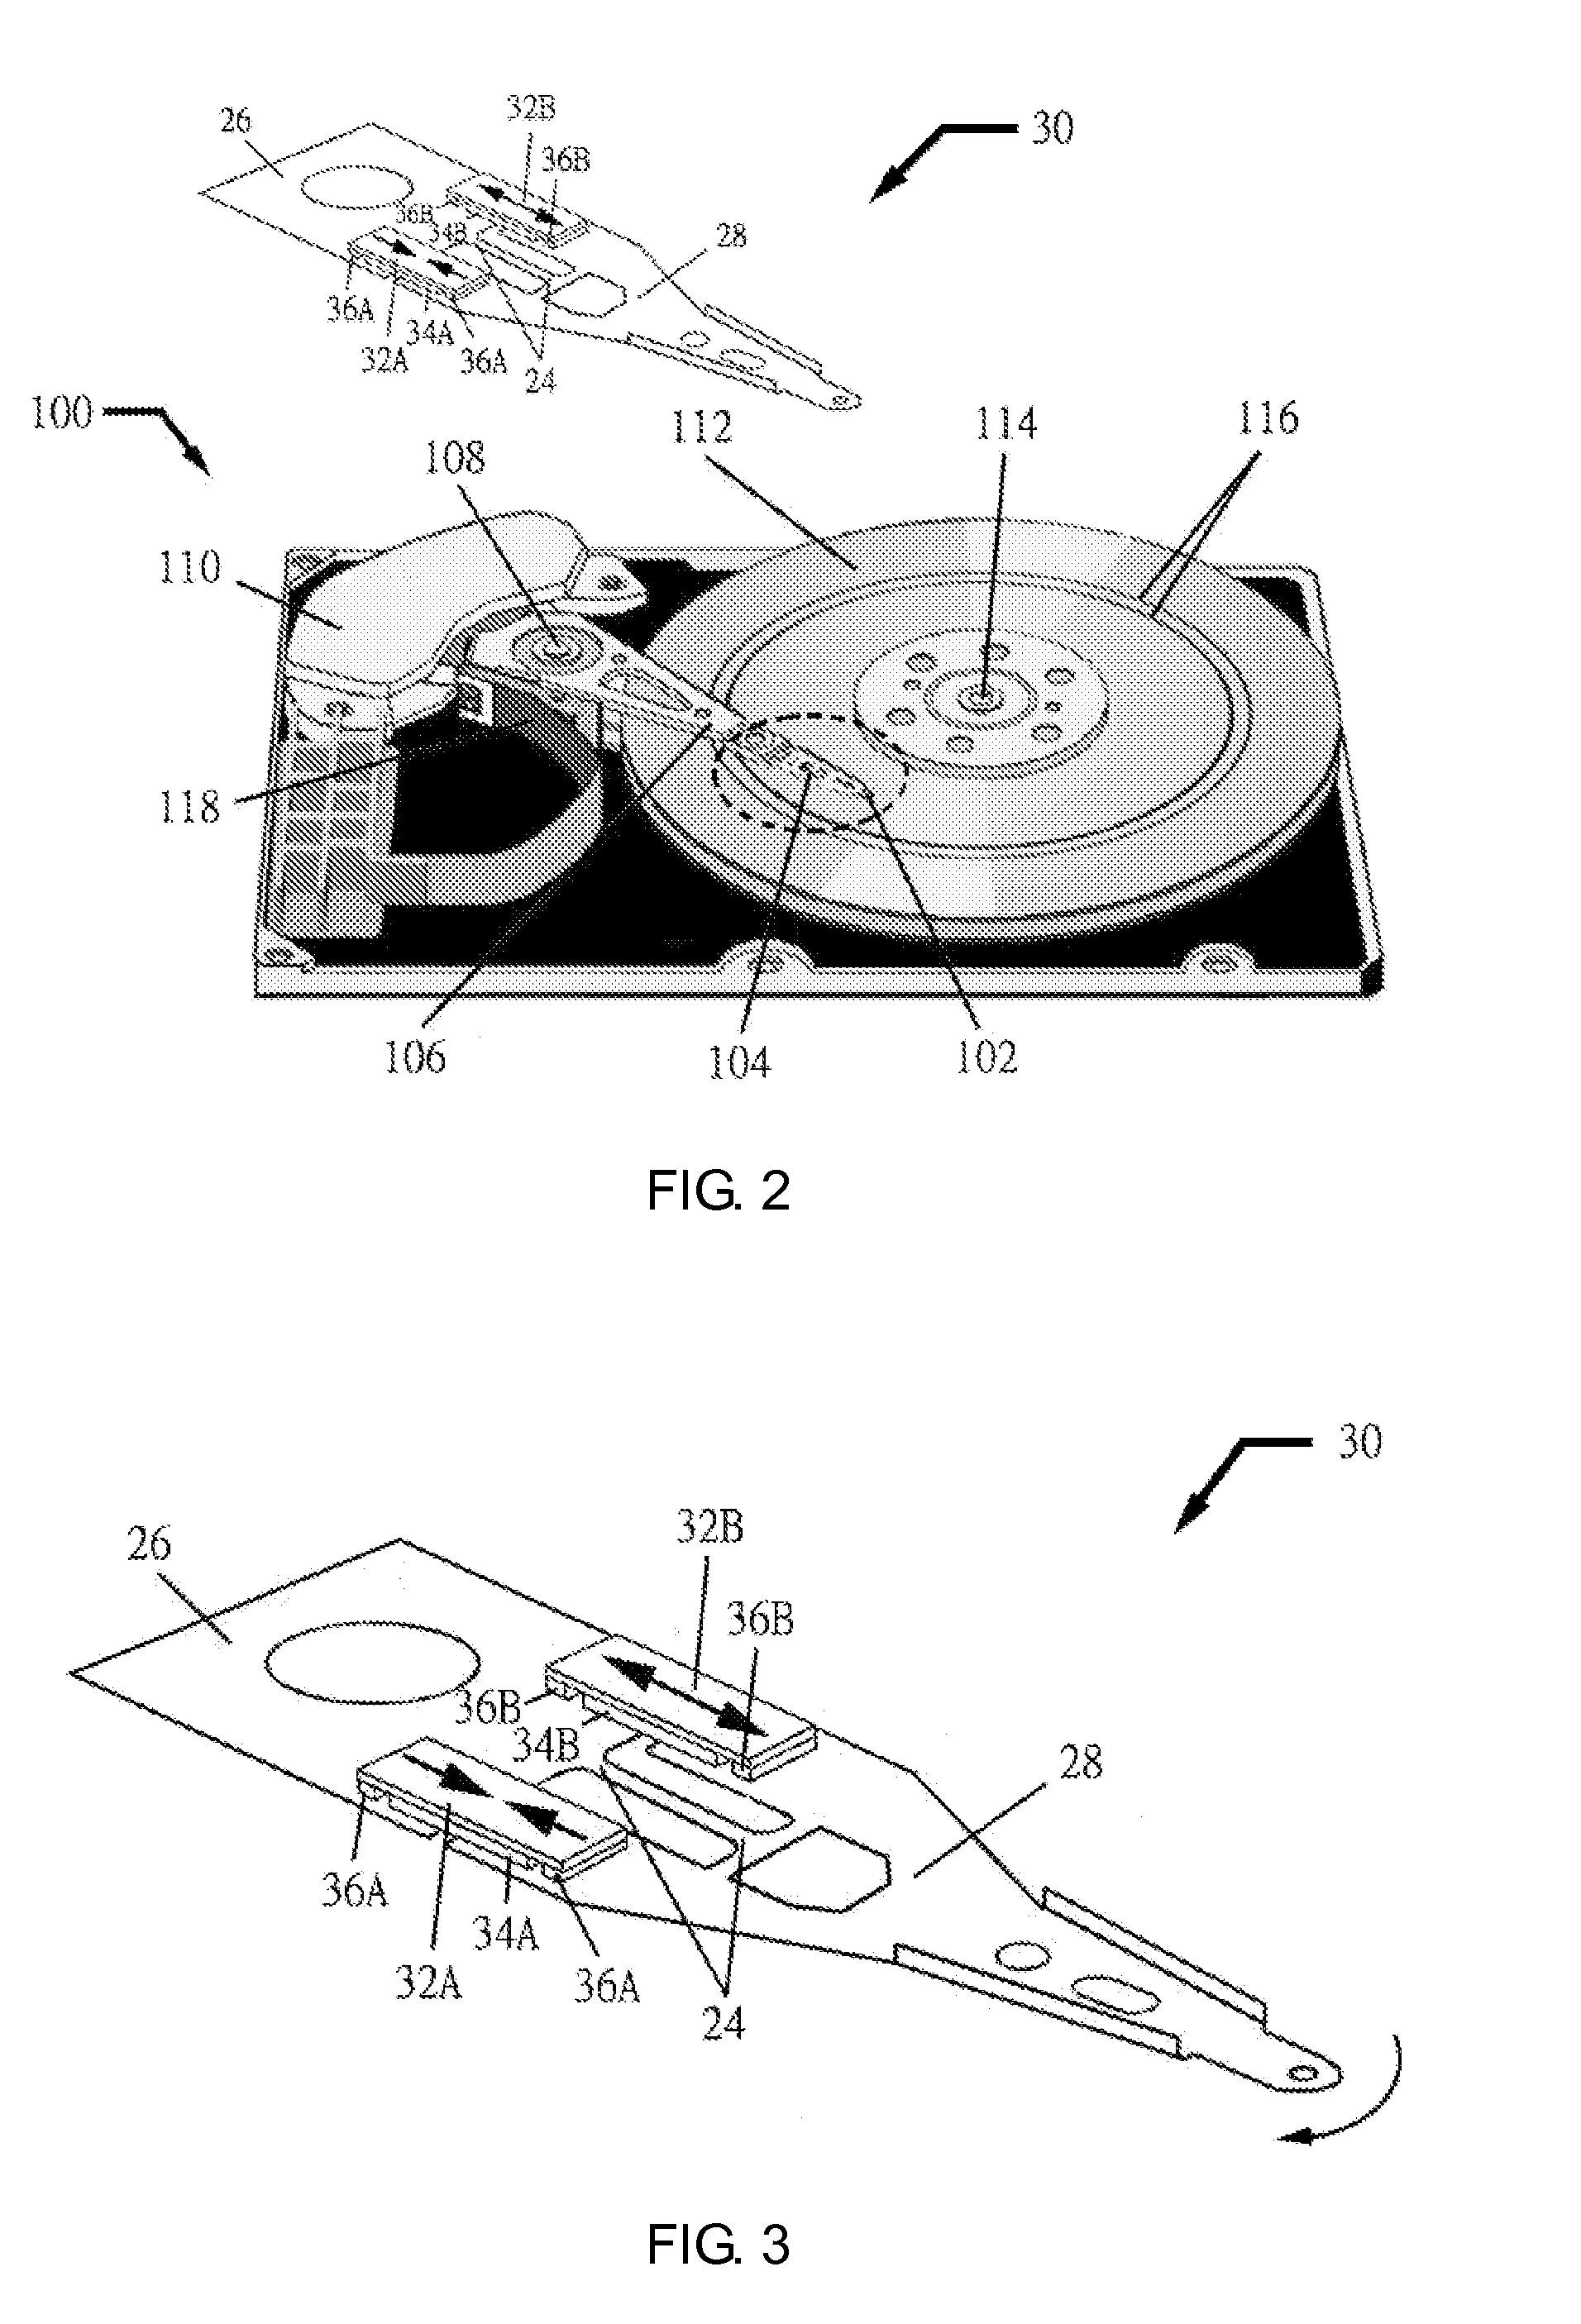 Piezoelectric actuated suspension with passive damping in hard disk drives